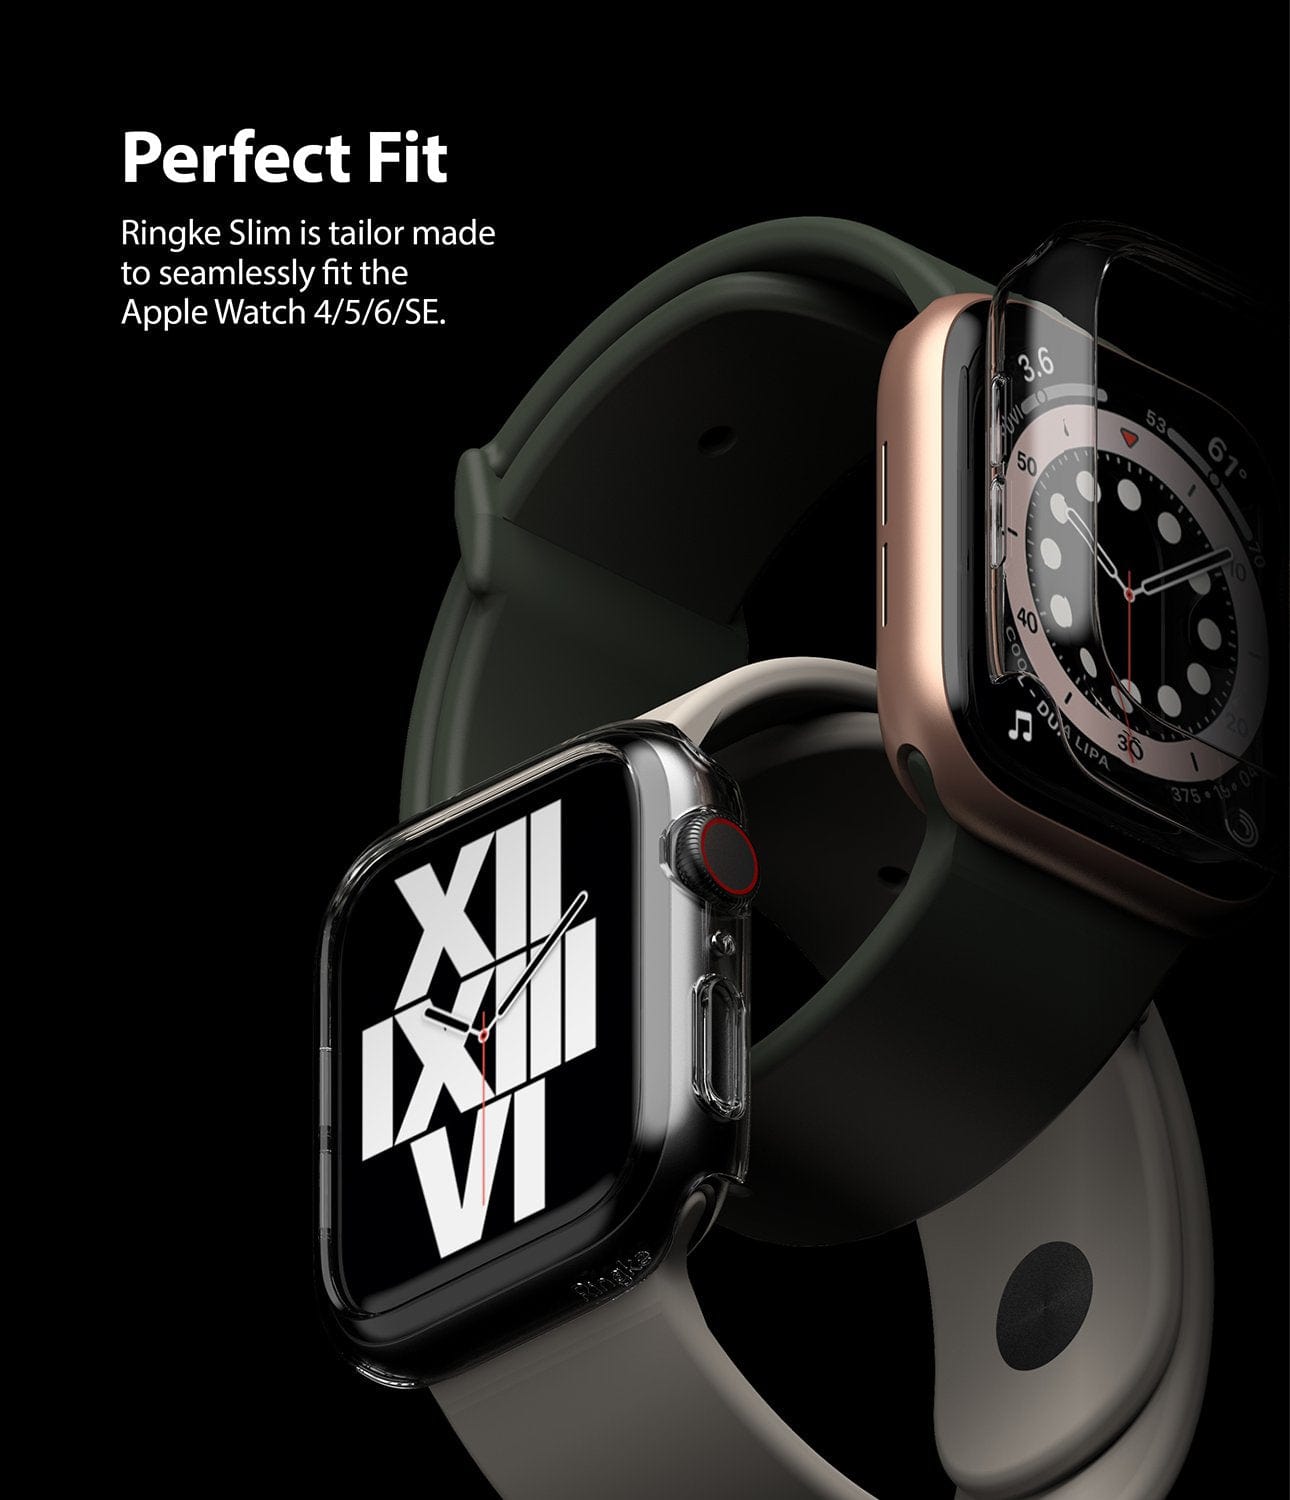 Here's a human-readable version focusing more on Google SEO:  "This case is specially crafted to be slim and lightweight, ensuring a perfect fit for your Apple Watch 44mm.